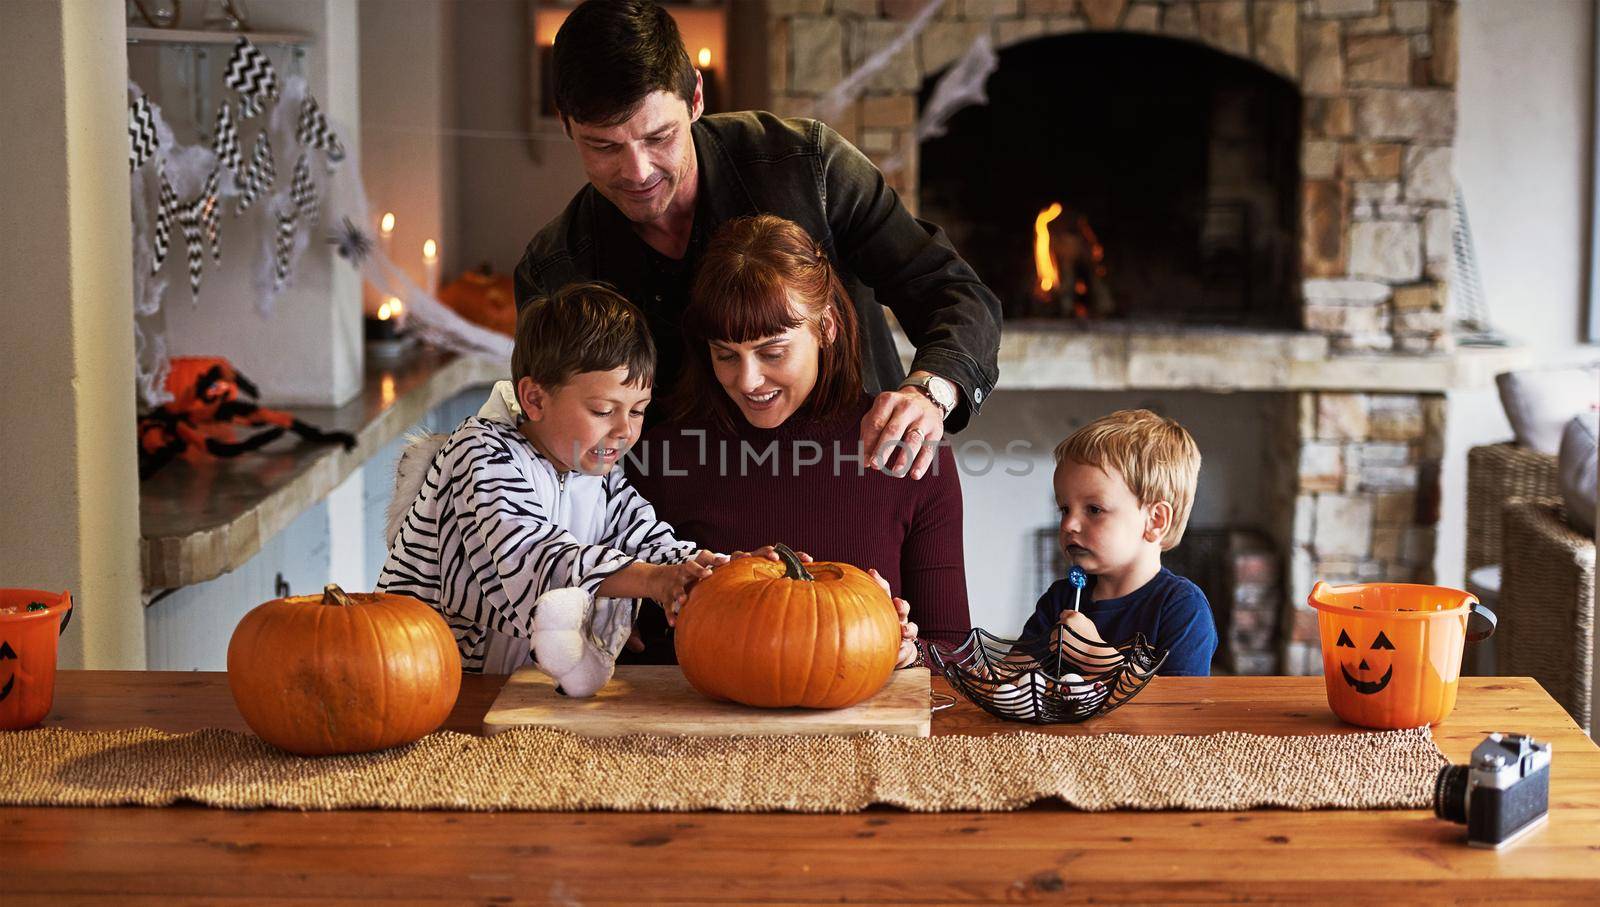 Our family is going to give you the creeps. an adorable young family carving out pumpkins and celebrating halloween together at home